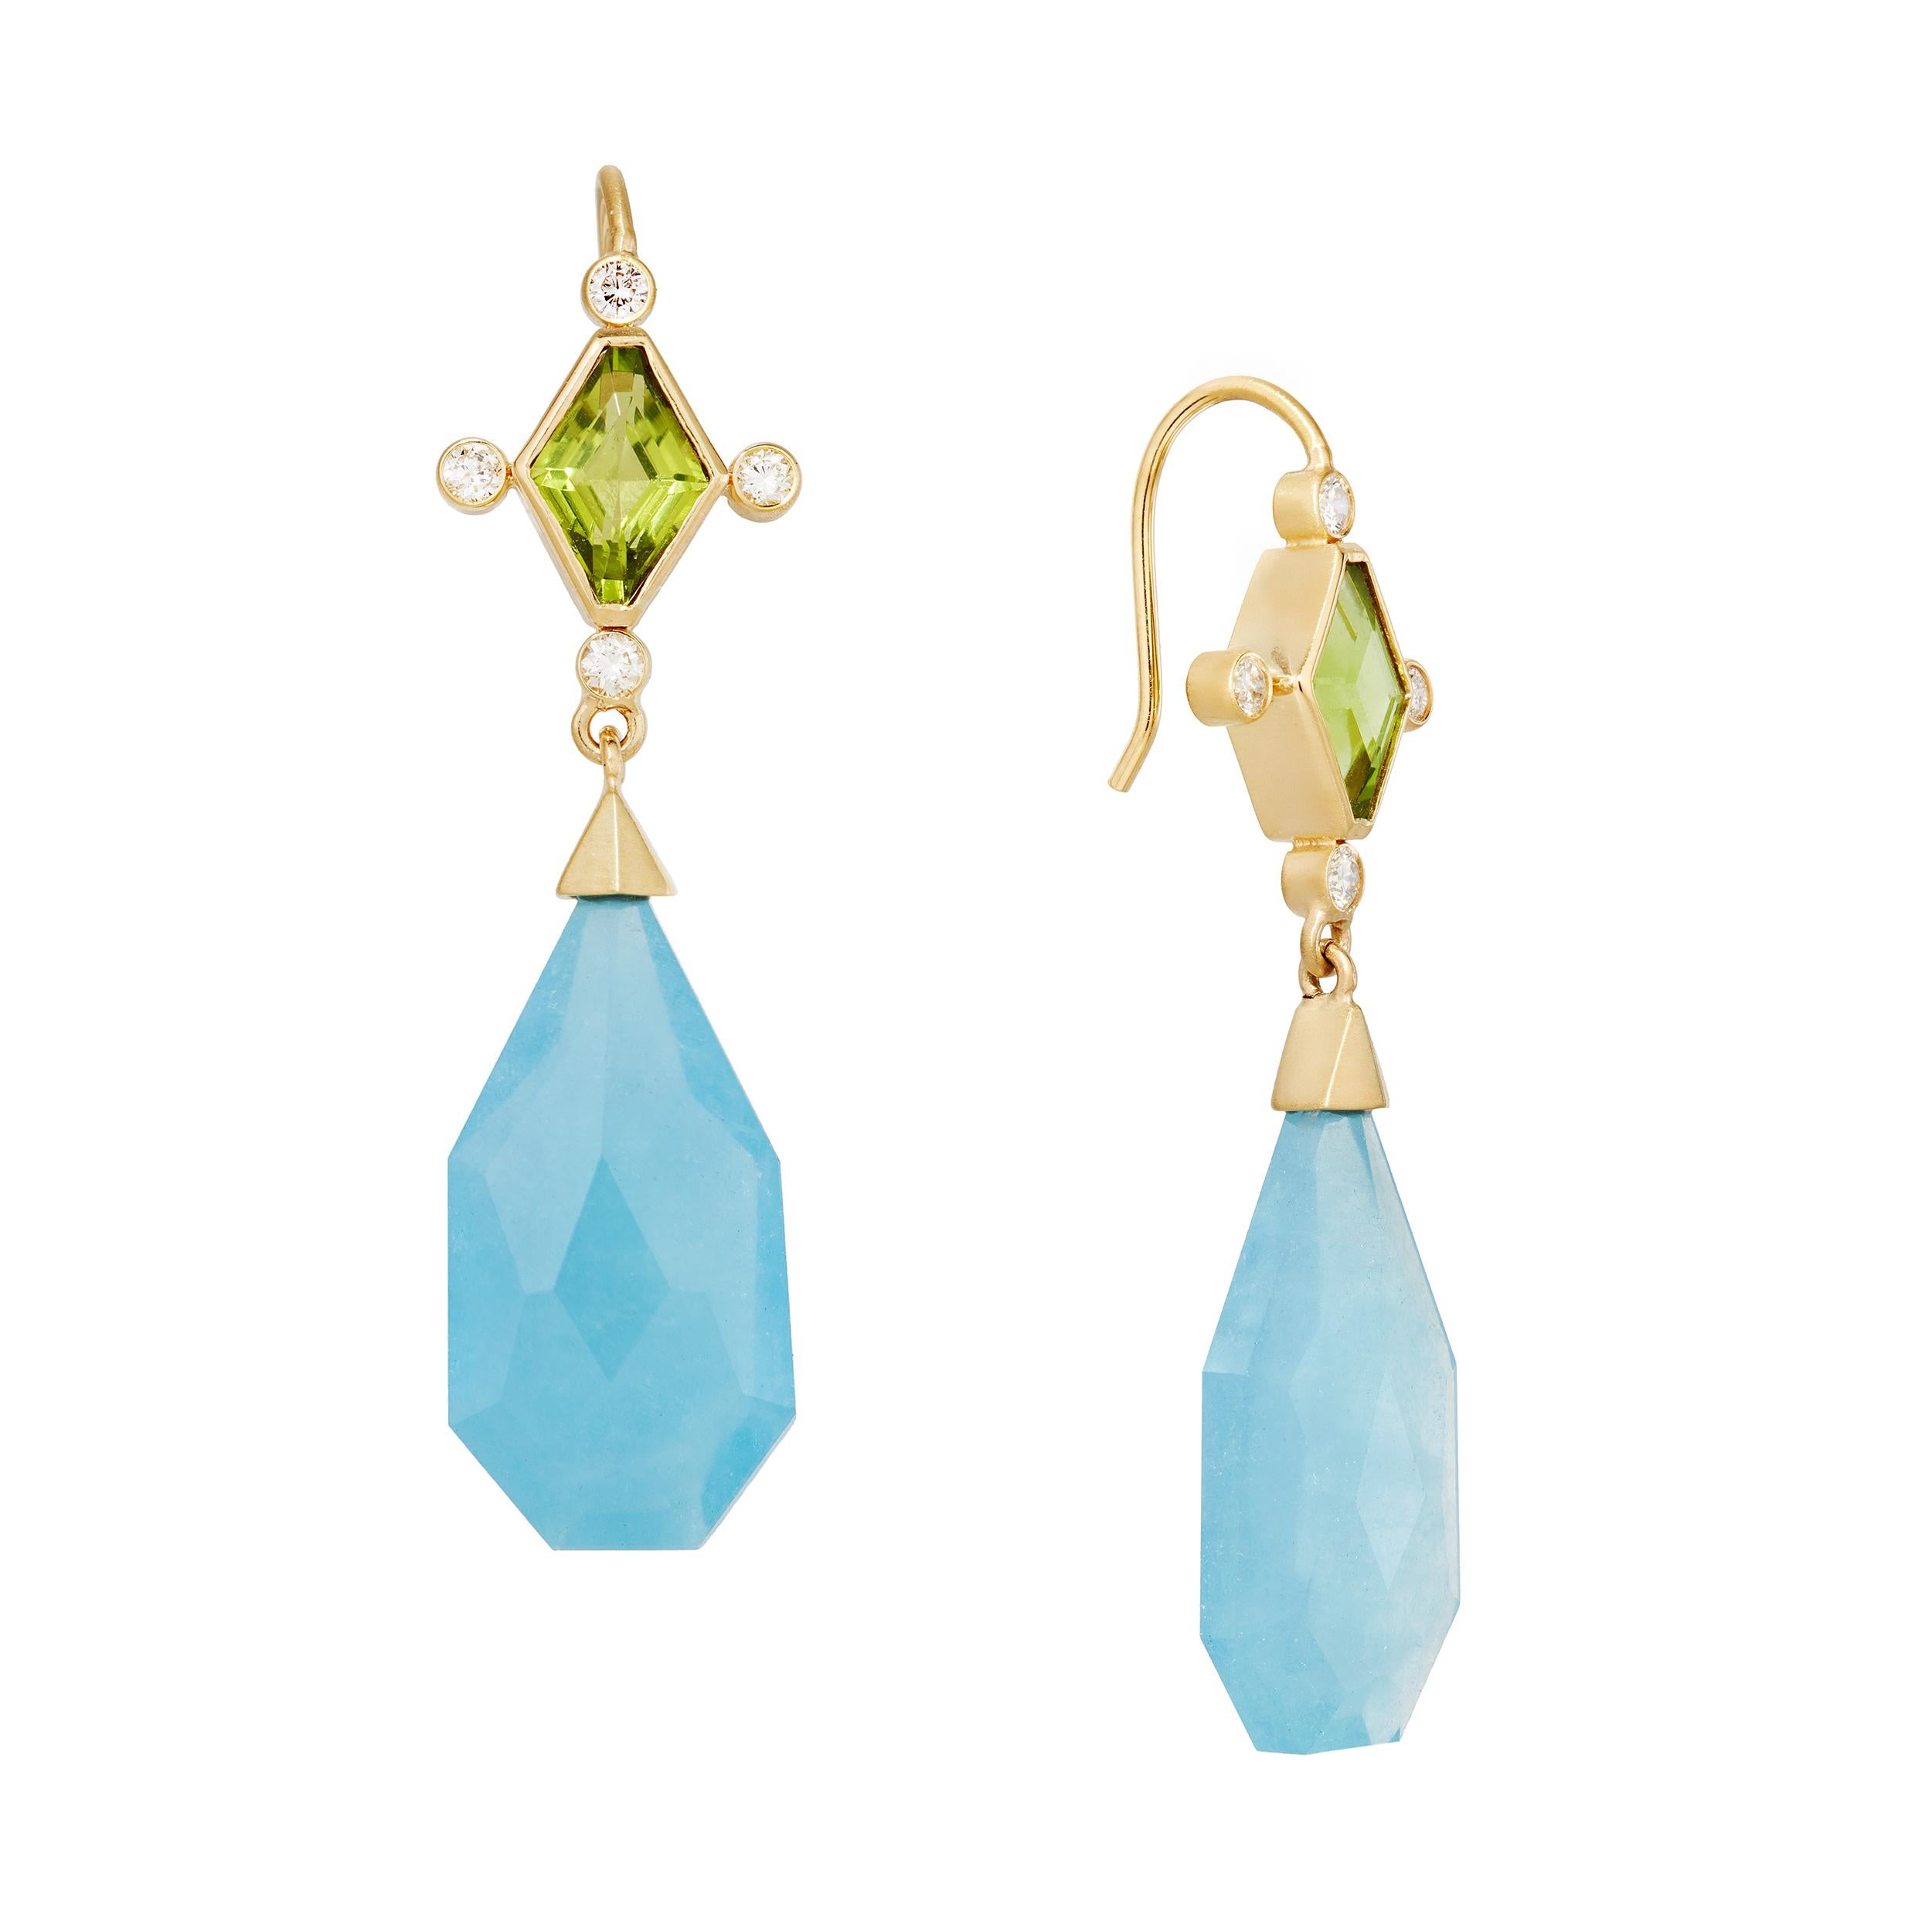 Matched Faceted Fancy Drops Aquamarine Measuring 25 x 12 x 6 mm
Matched Pair of Fancy Lozenge Cut Peridot Weighing 2.50 Carats and Measuring 9 x 6 x 4 mm	
8 Diamonds Weighing:  0.48 Carats

Length:  2